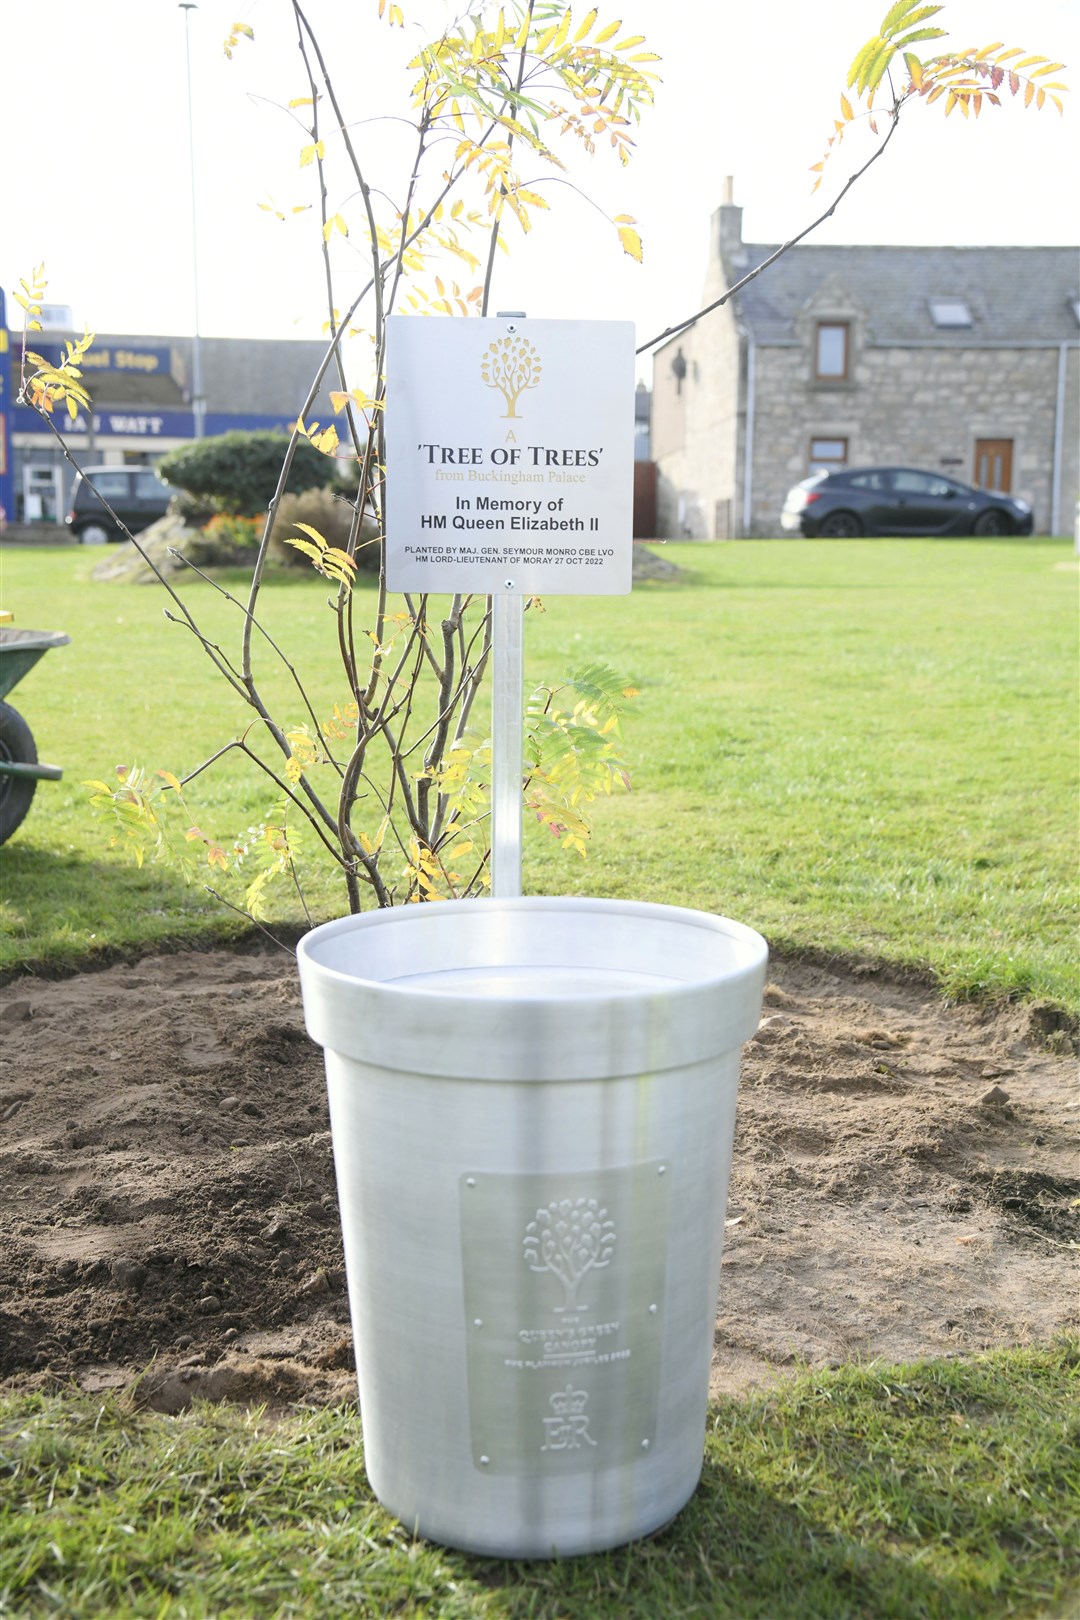 The crested pot which came with the special tree. Picture: Beth Taylor